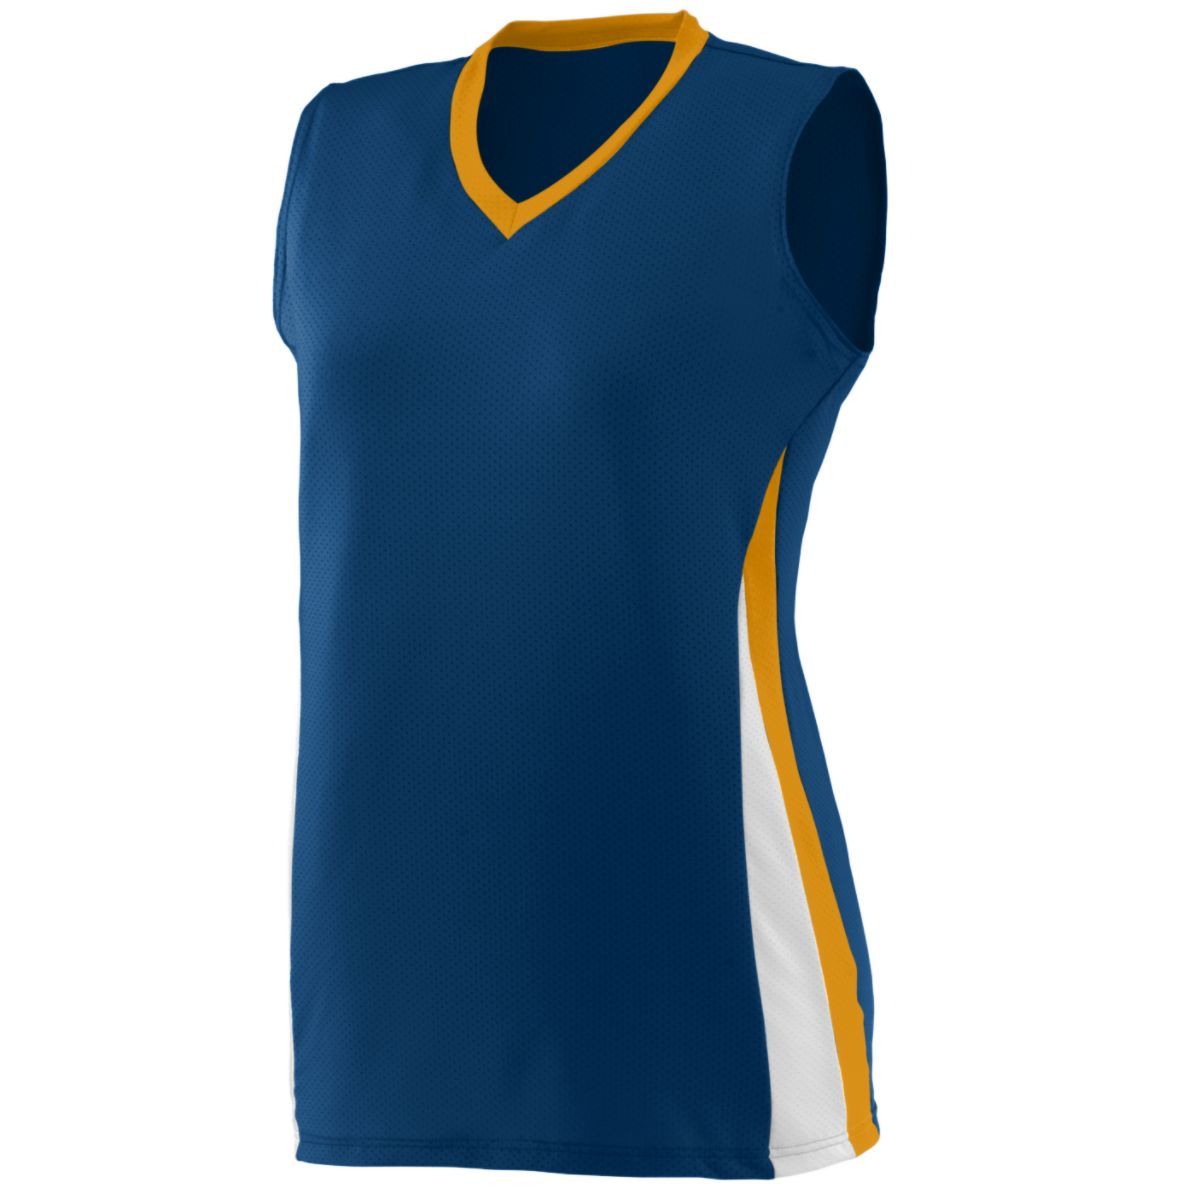 Augusta Sportswear Girls Tornado Jersey in Navy/Gold/White  -Part of the Girls, Augusta-Products, Volleyball, Girls-Jersey, Shirts product lines at KanaleyCreations.com